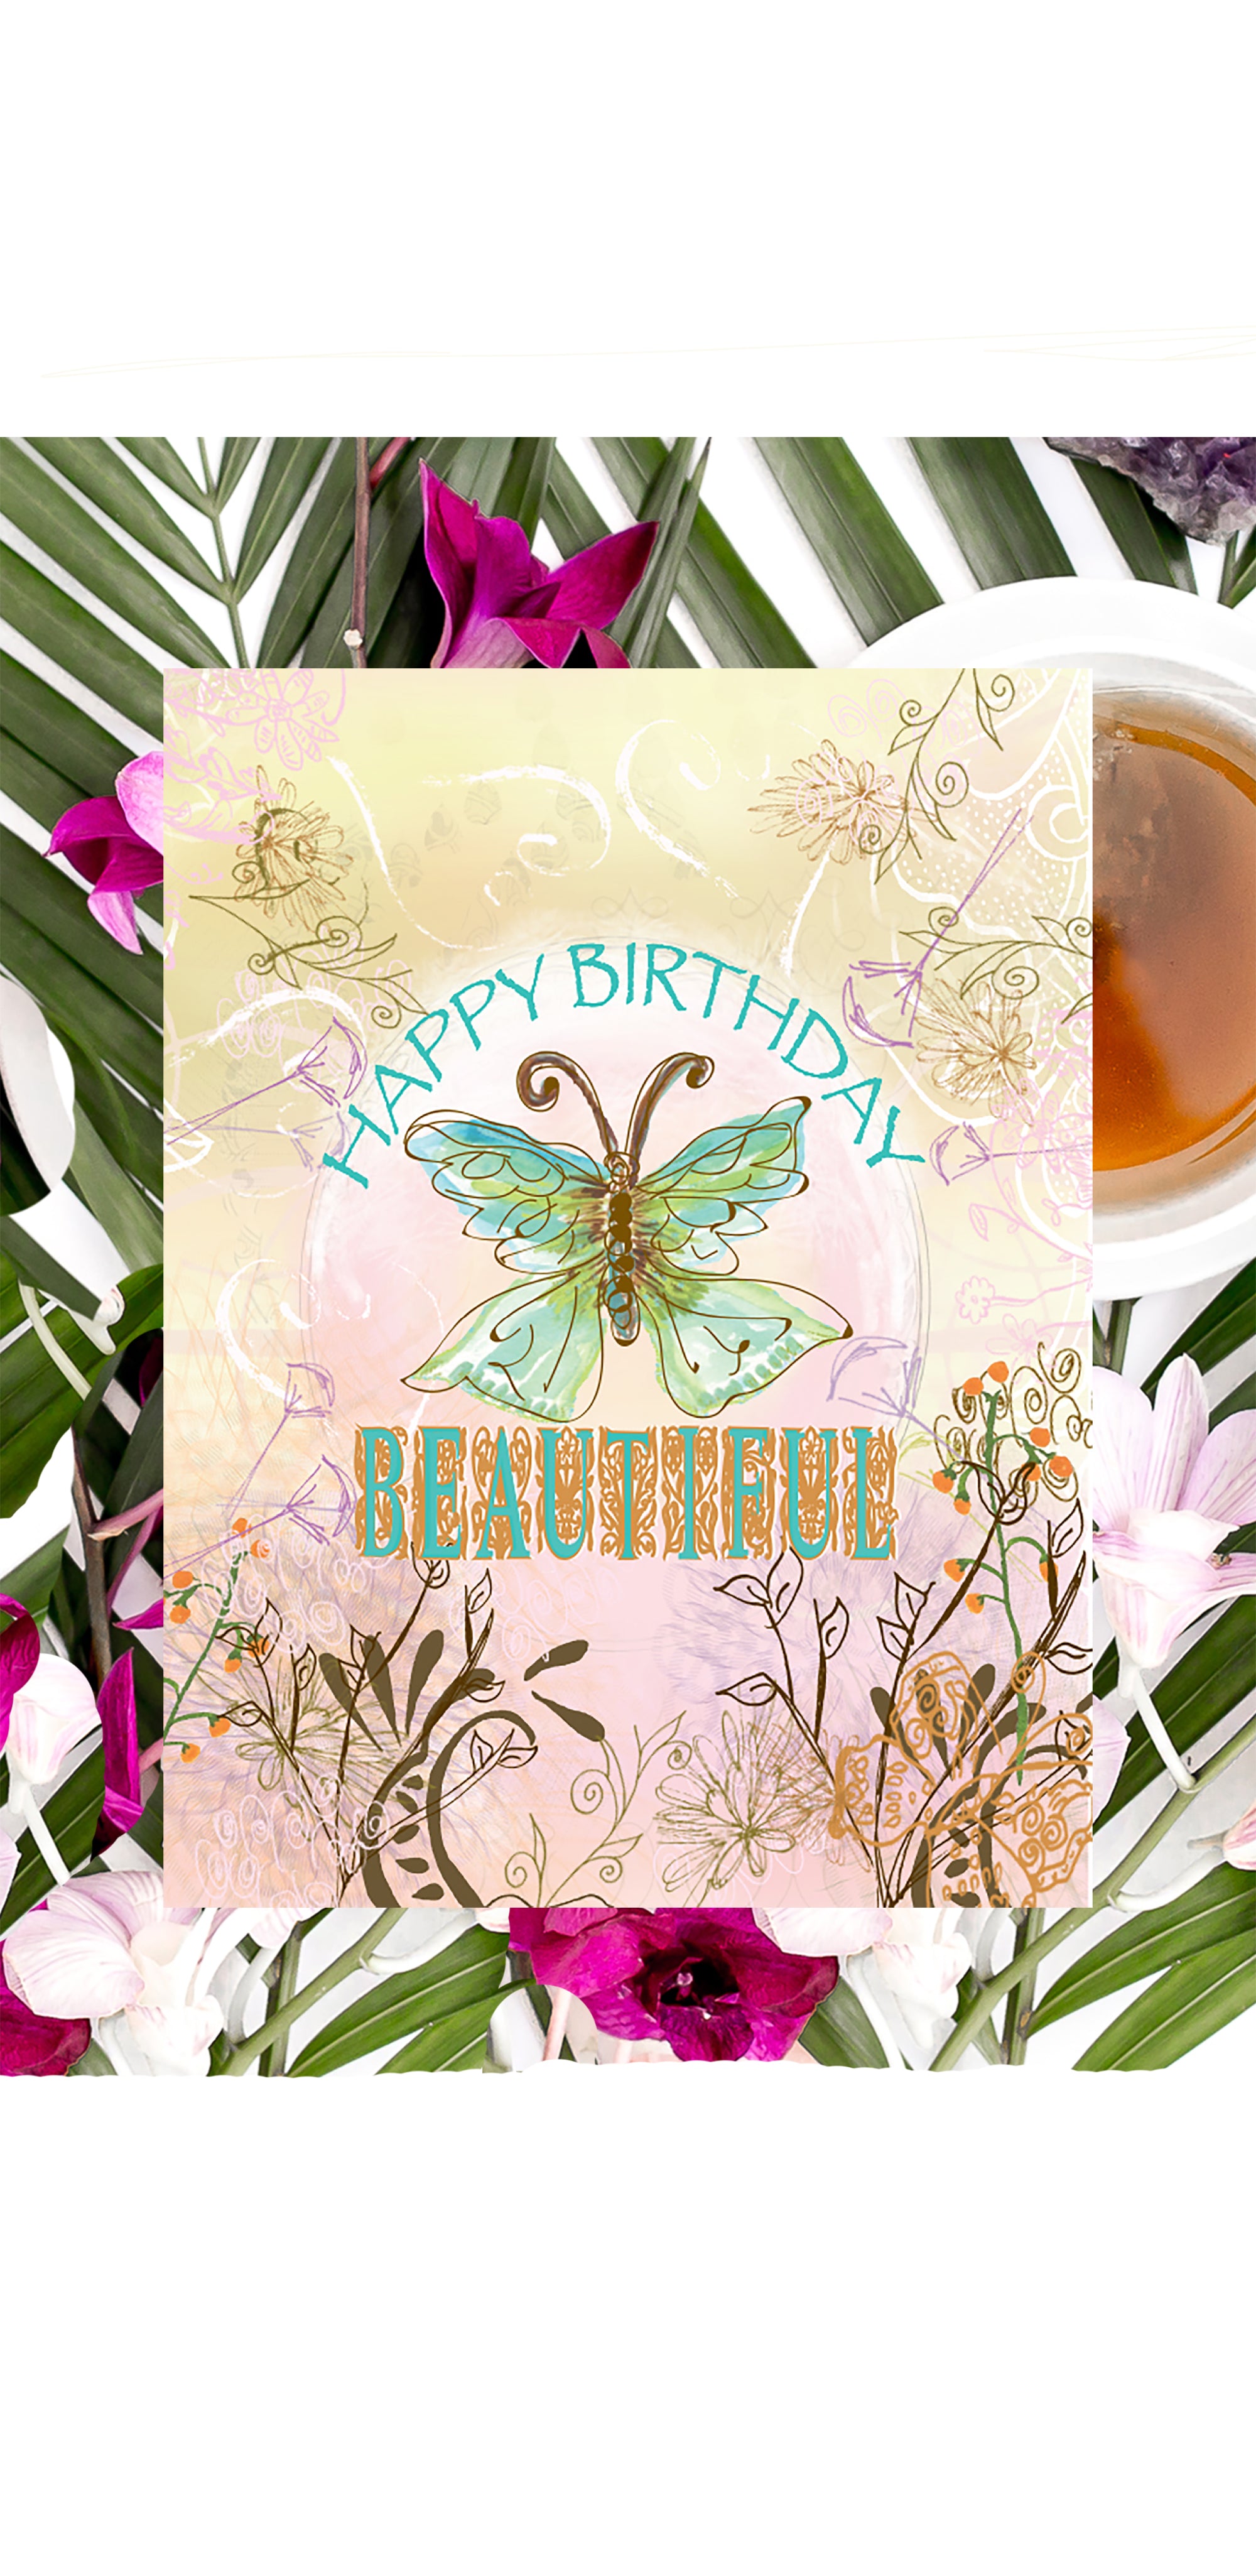 Happy Birthday Beautiful Greeting Card - Dreams After All